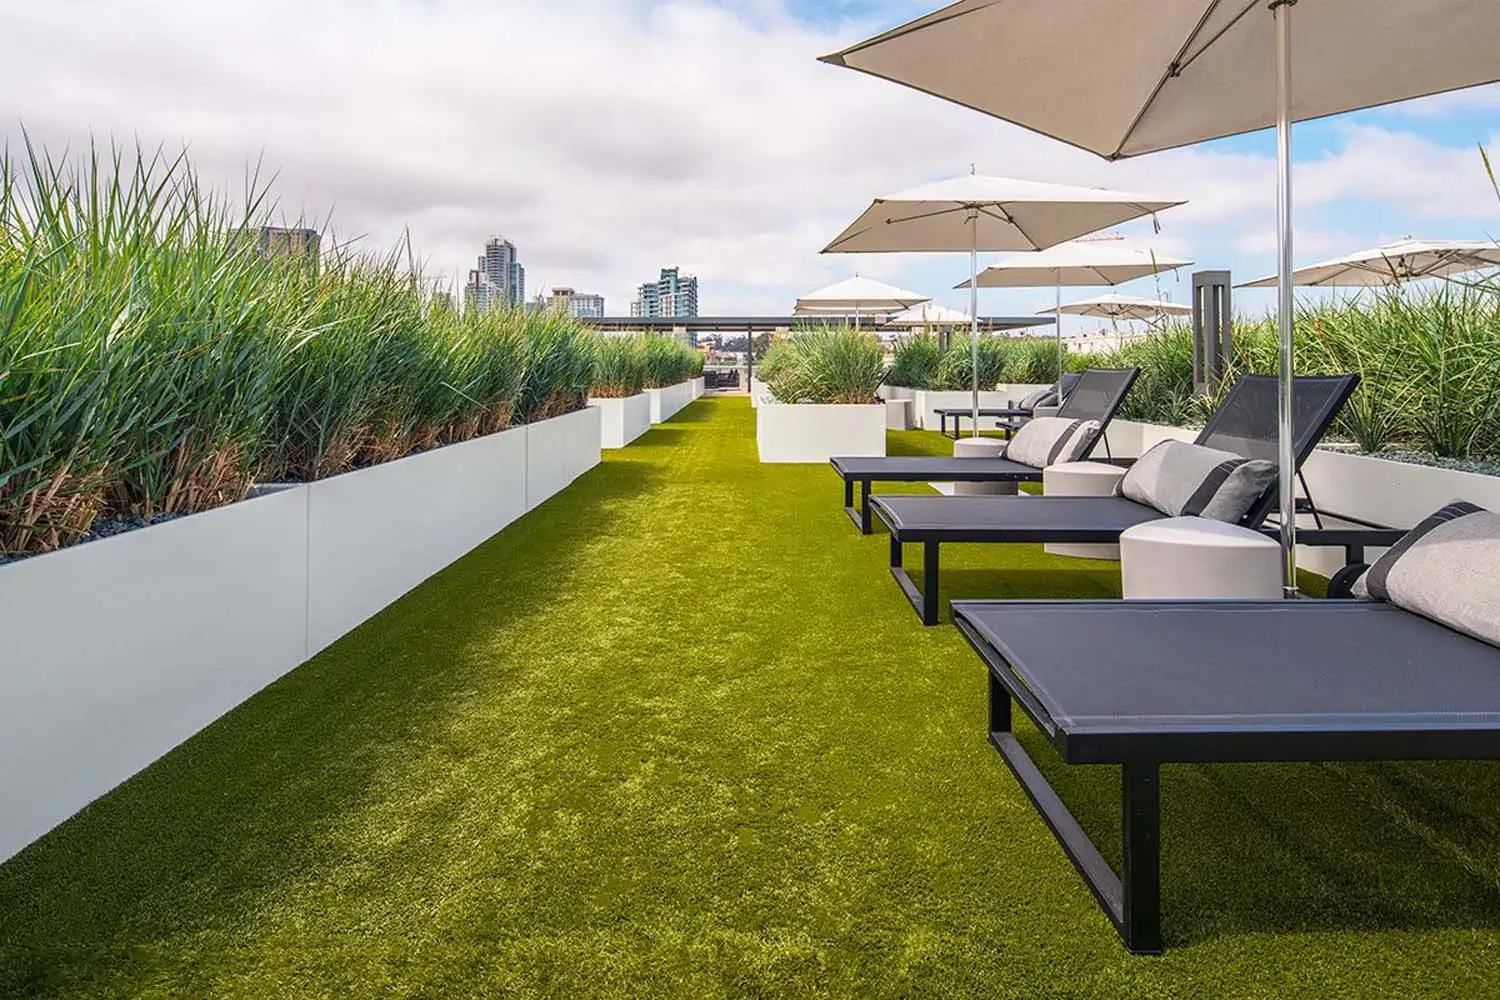 Artificial grass patio relaxation area from SYNLawn